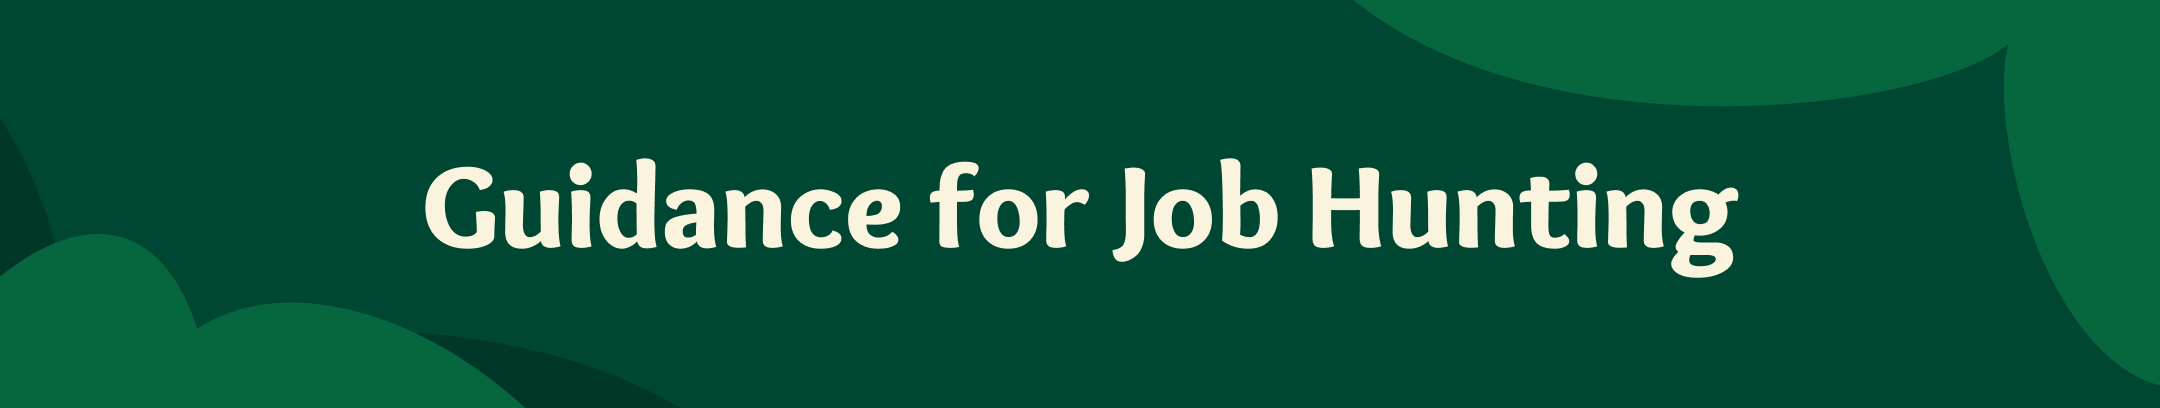 This is a wide banner-like image with a dark green background and the words “Guidance for Job Hunting” in large, white text centered across the slide.